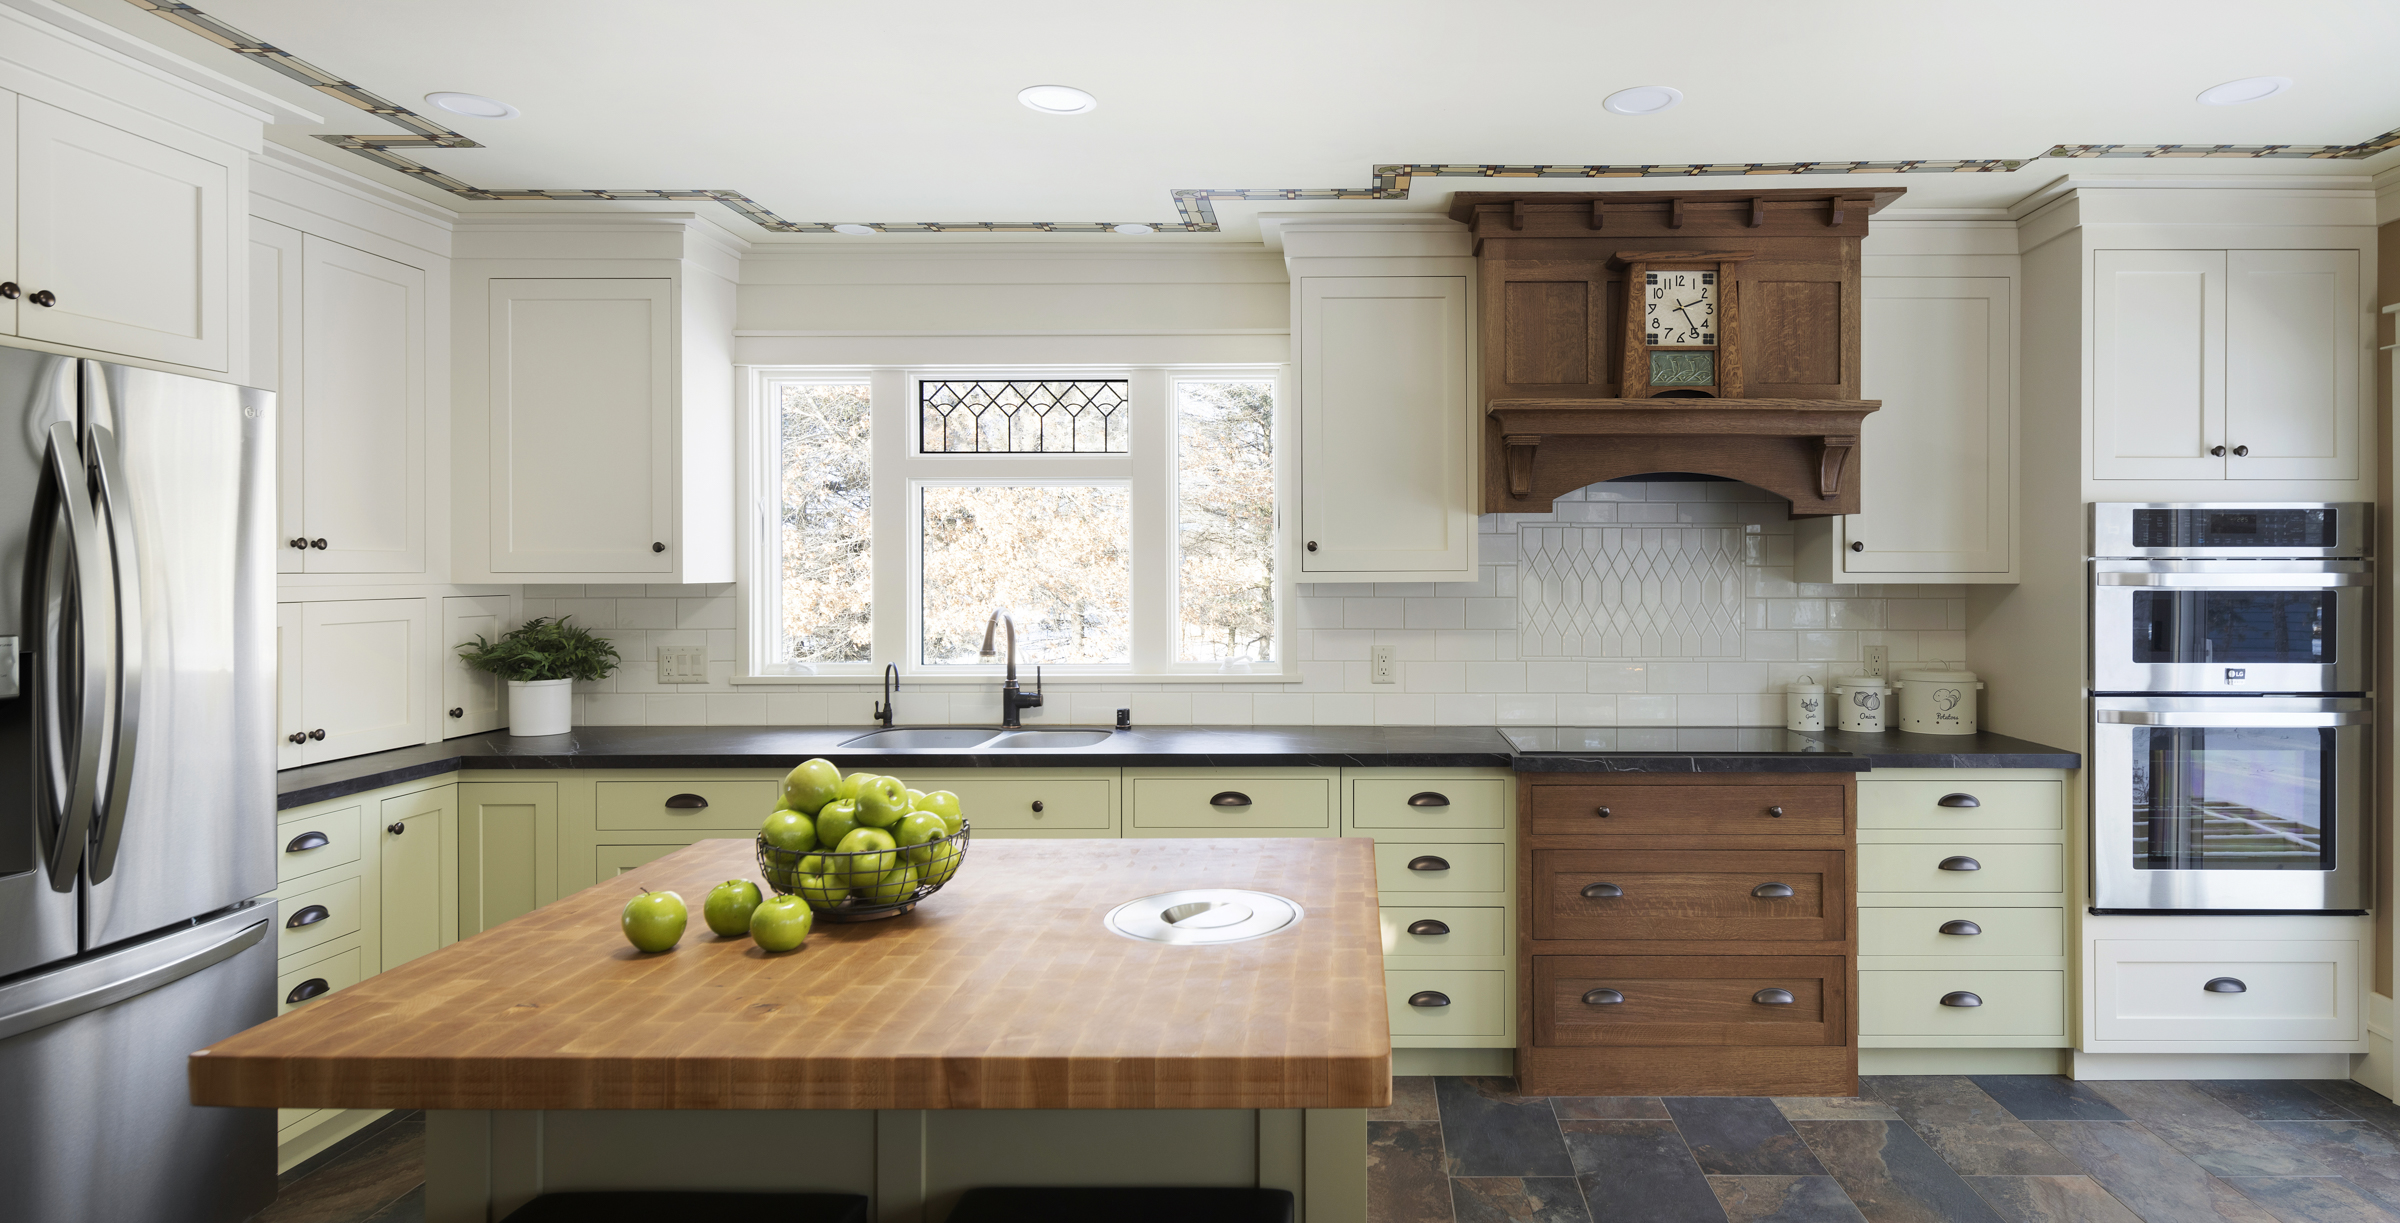 Kitchen with natural wood stove hood, light green base cabinets, and white upper cabinets